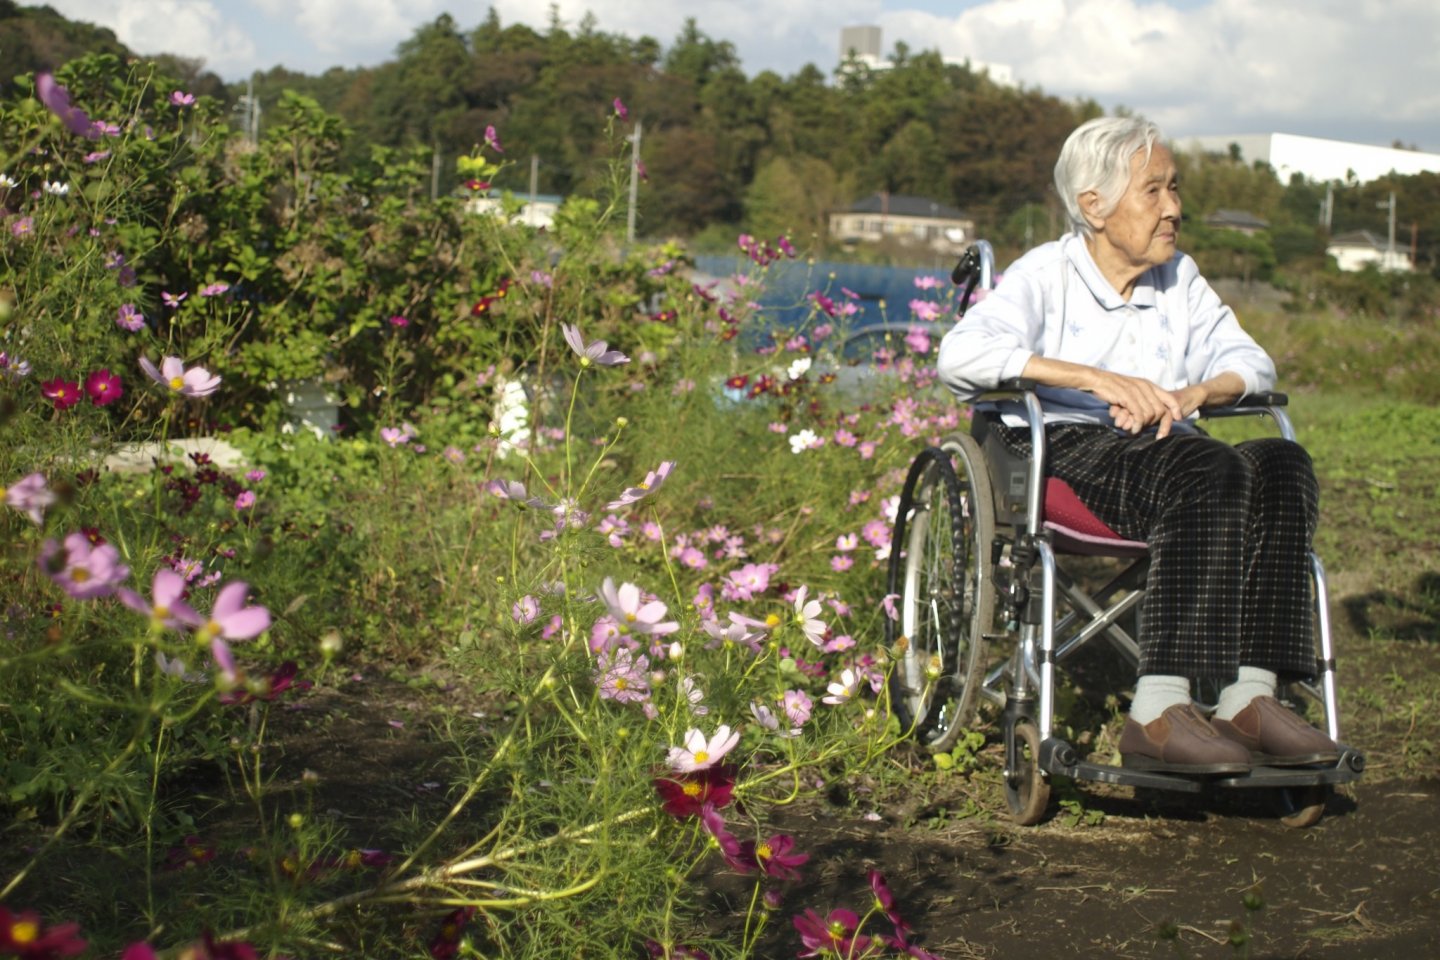 An elderly lady poses for a picture before the cosmos blossoms.